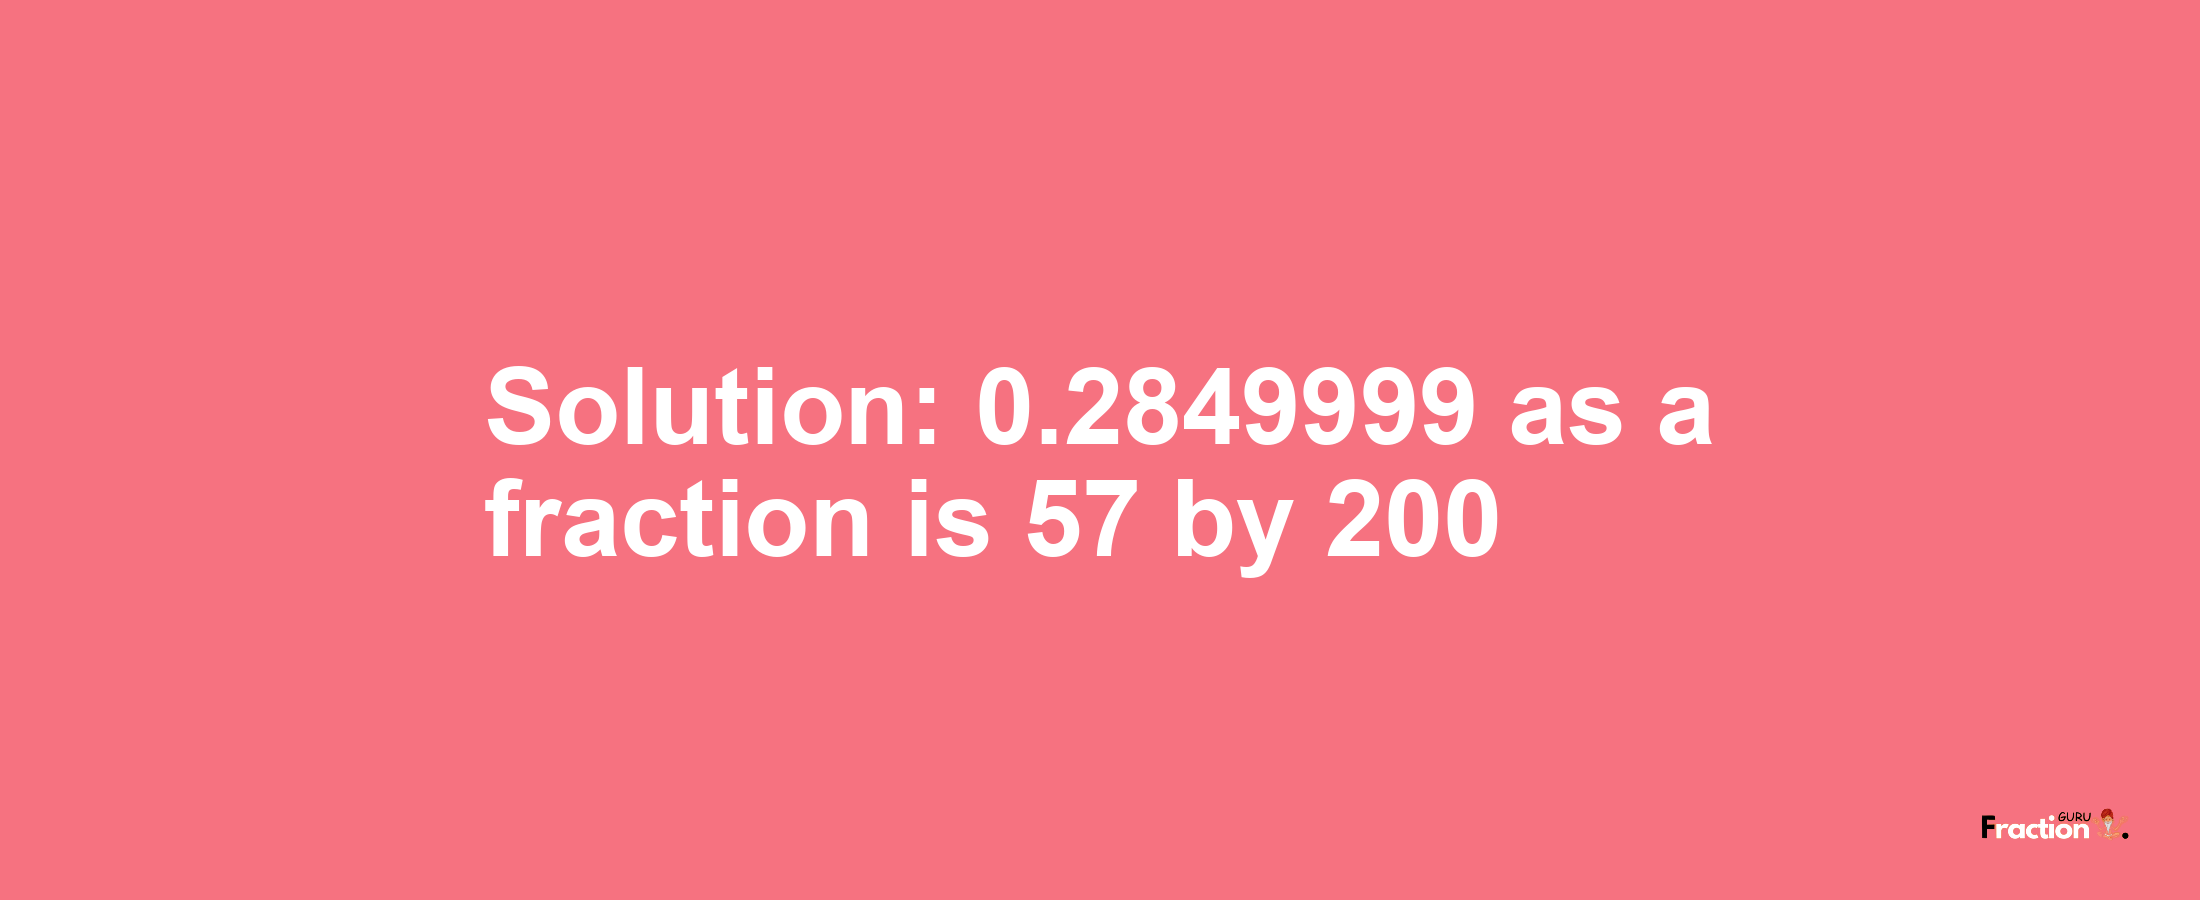 Solution:0.2849999 as a fraction is 57/200